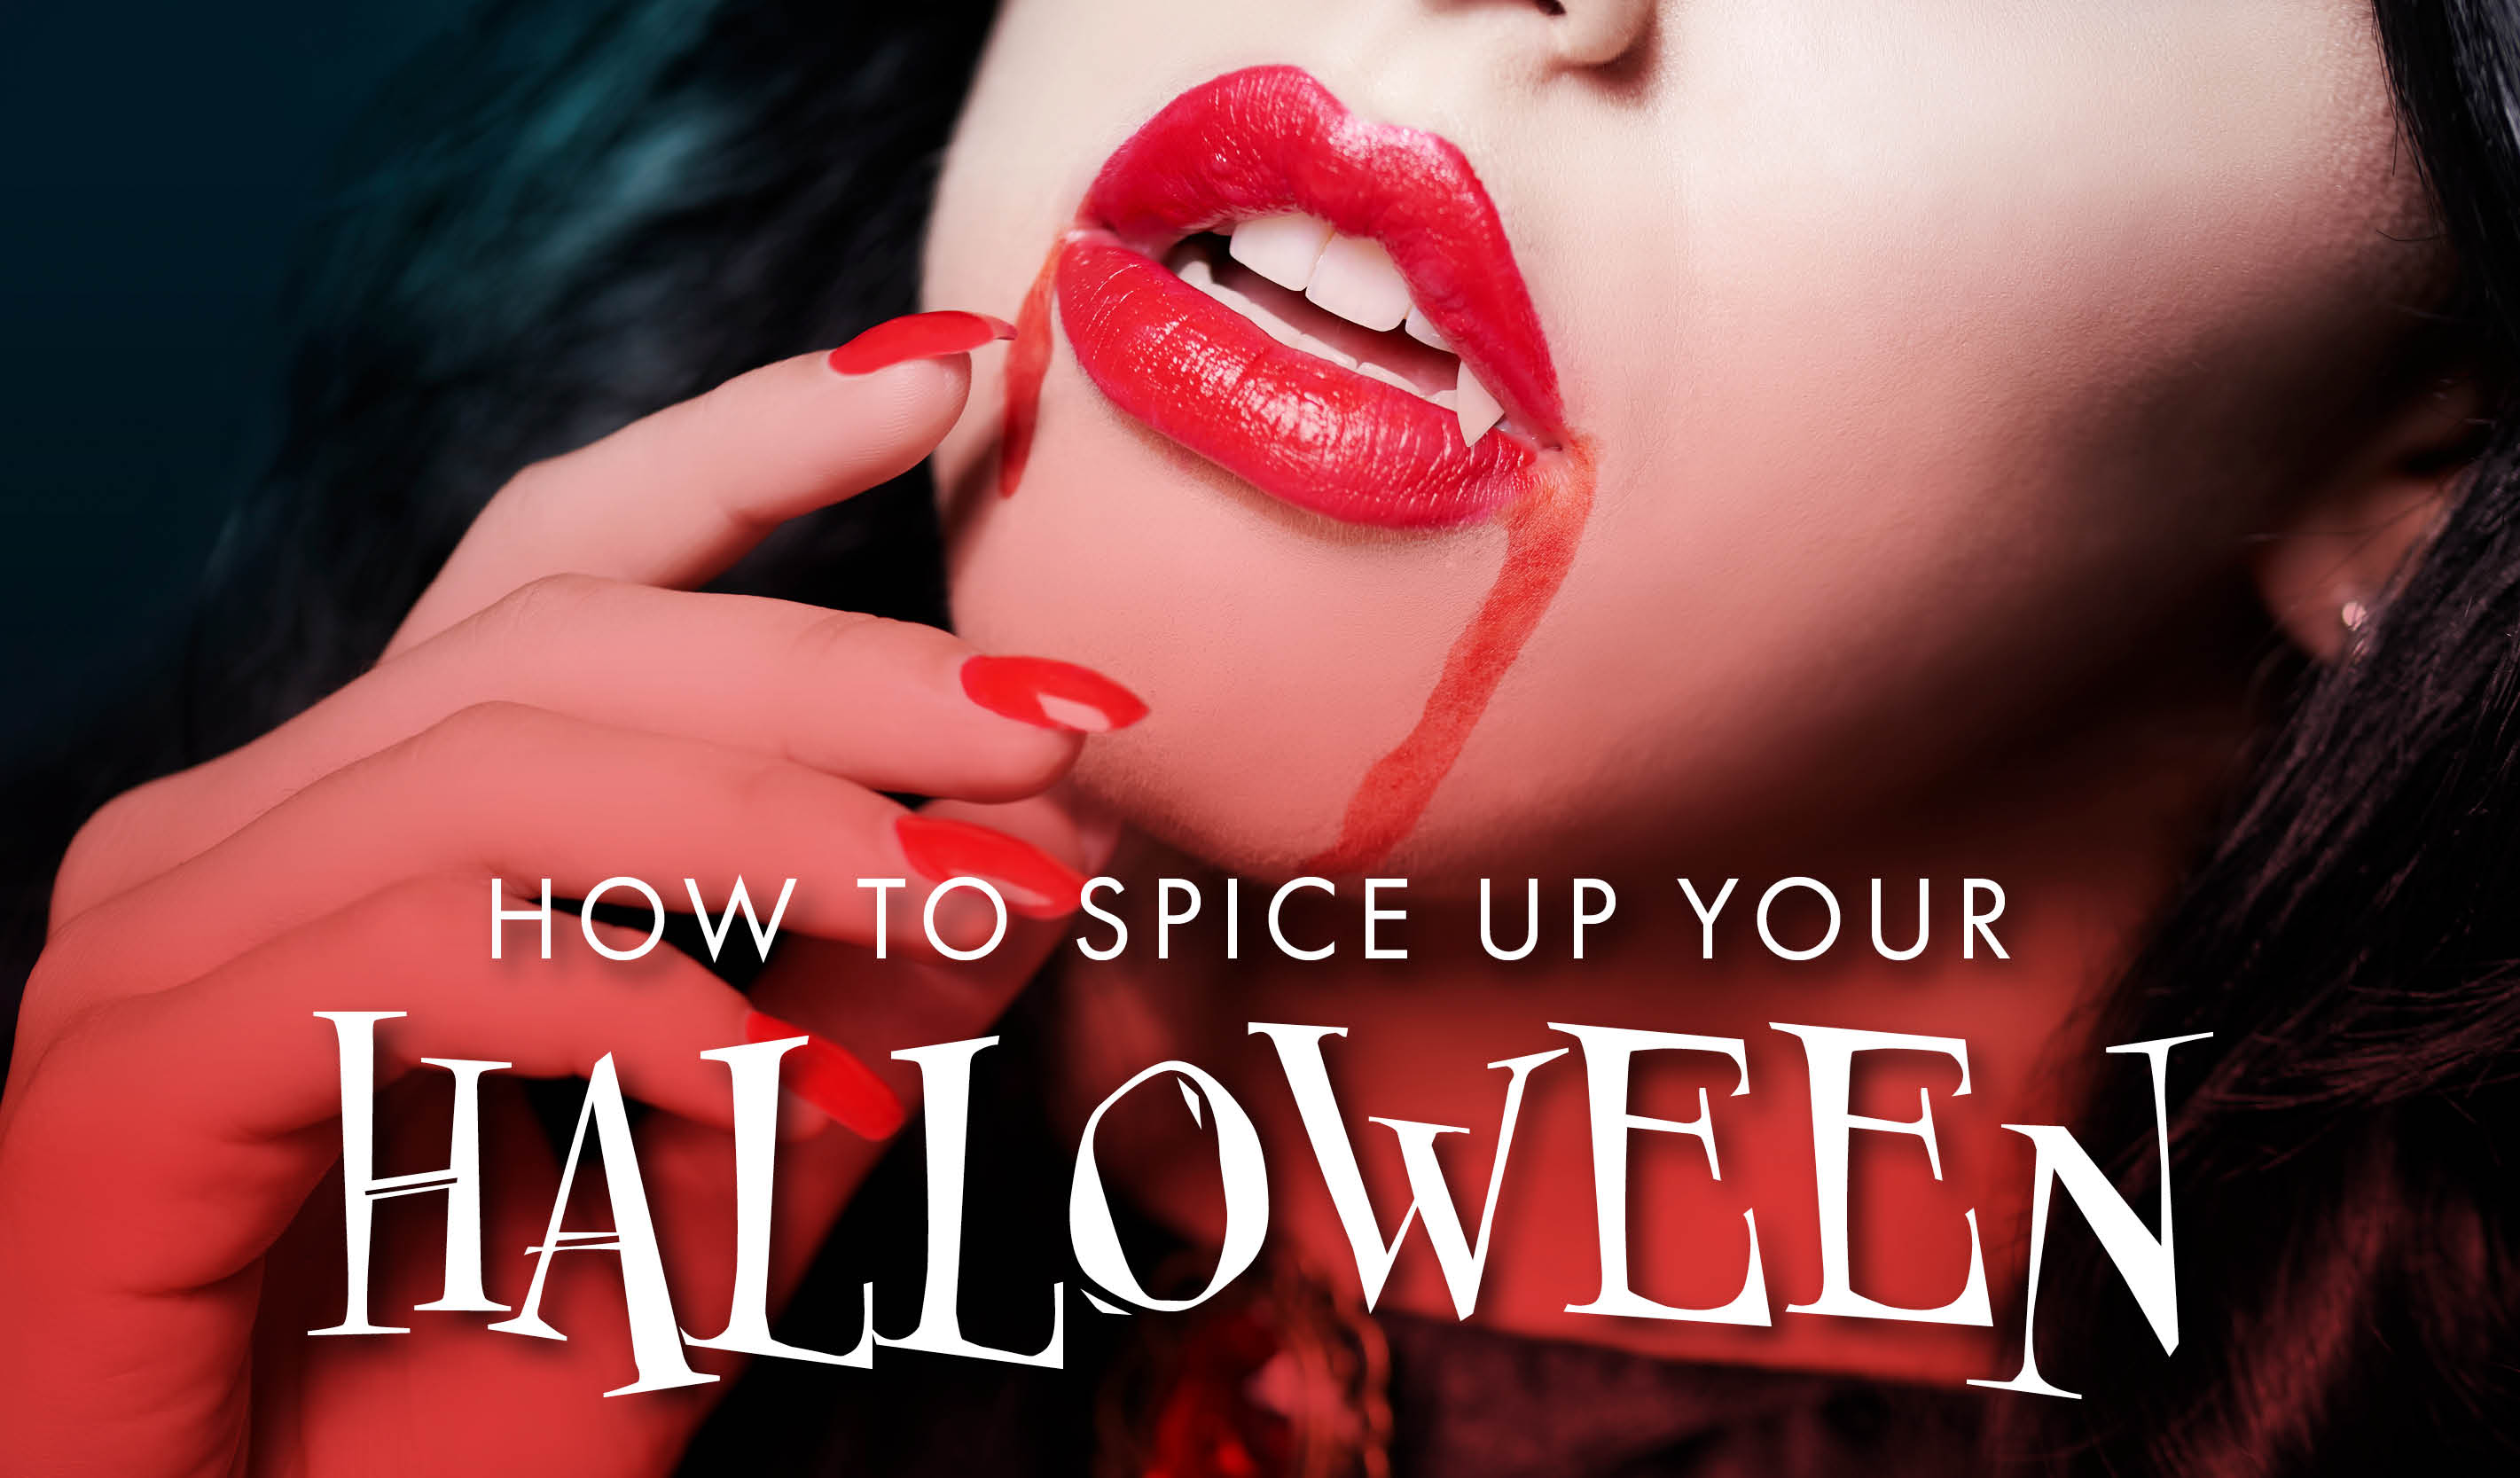 5 Tips on How to Spice Up Your Halloween